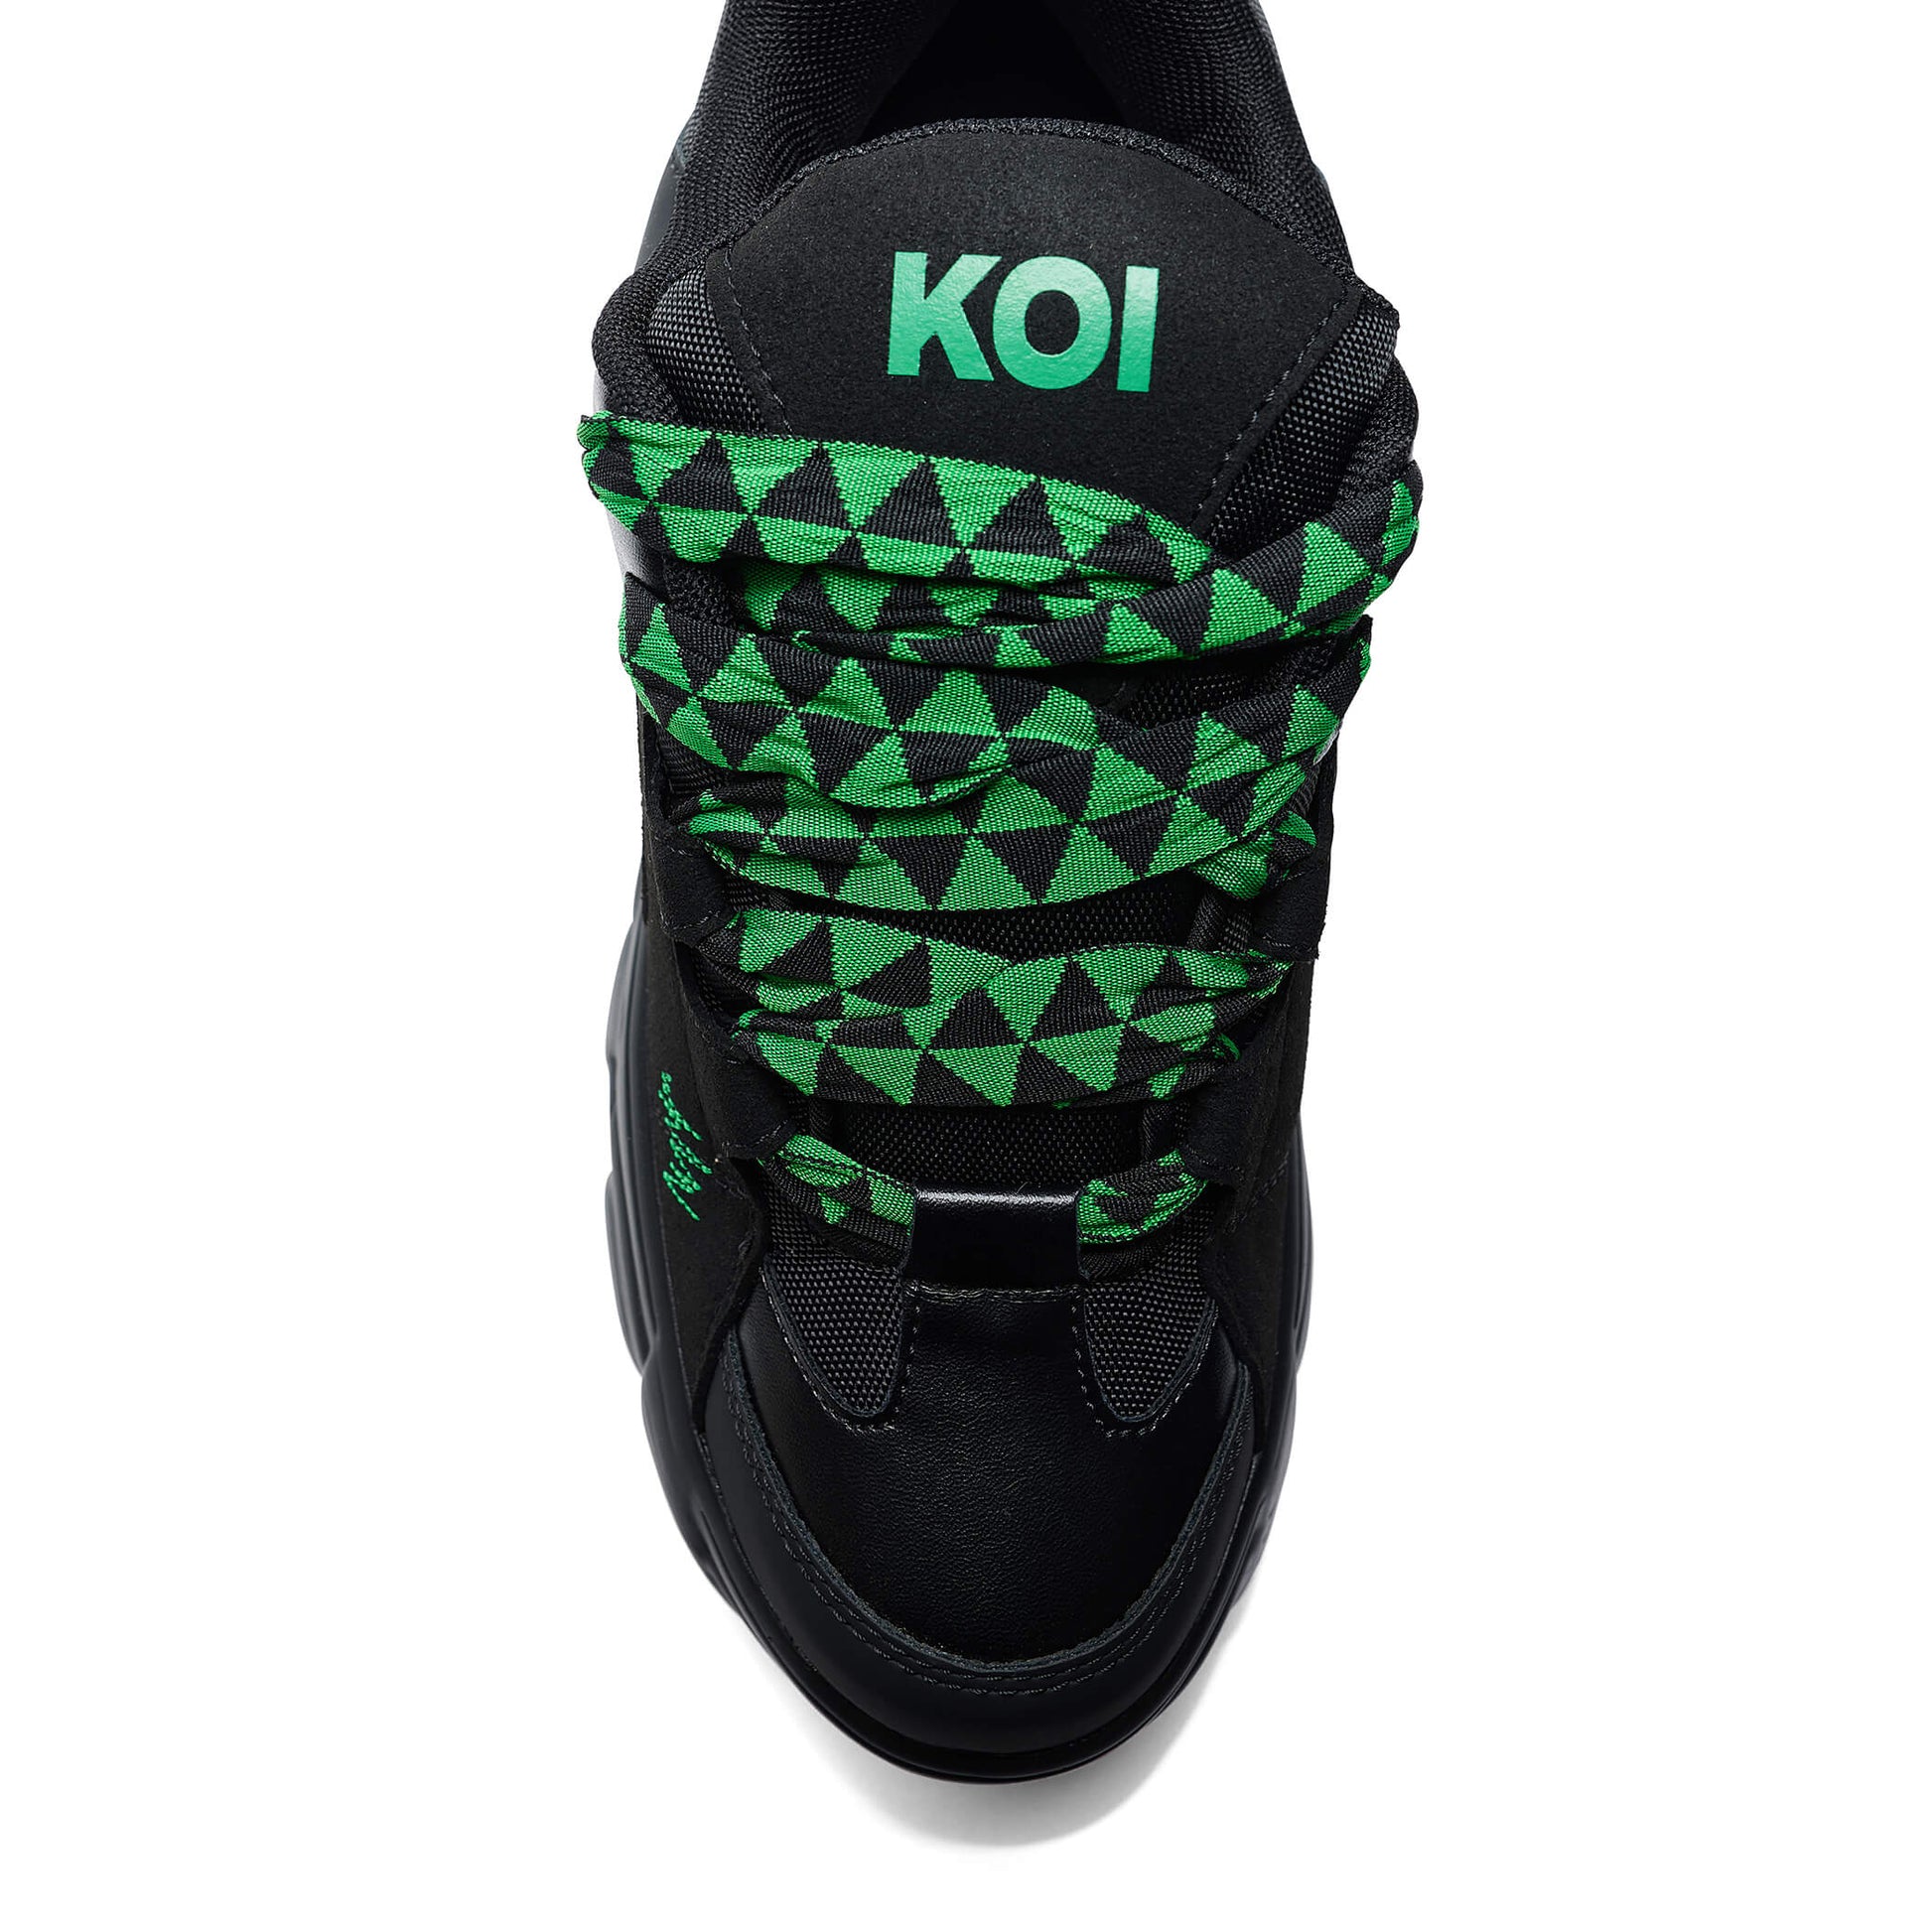 Ricta Flip Men's Chunky Trainers - Green Lace - Trainers - KOI Footwear - Black - Top View